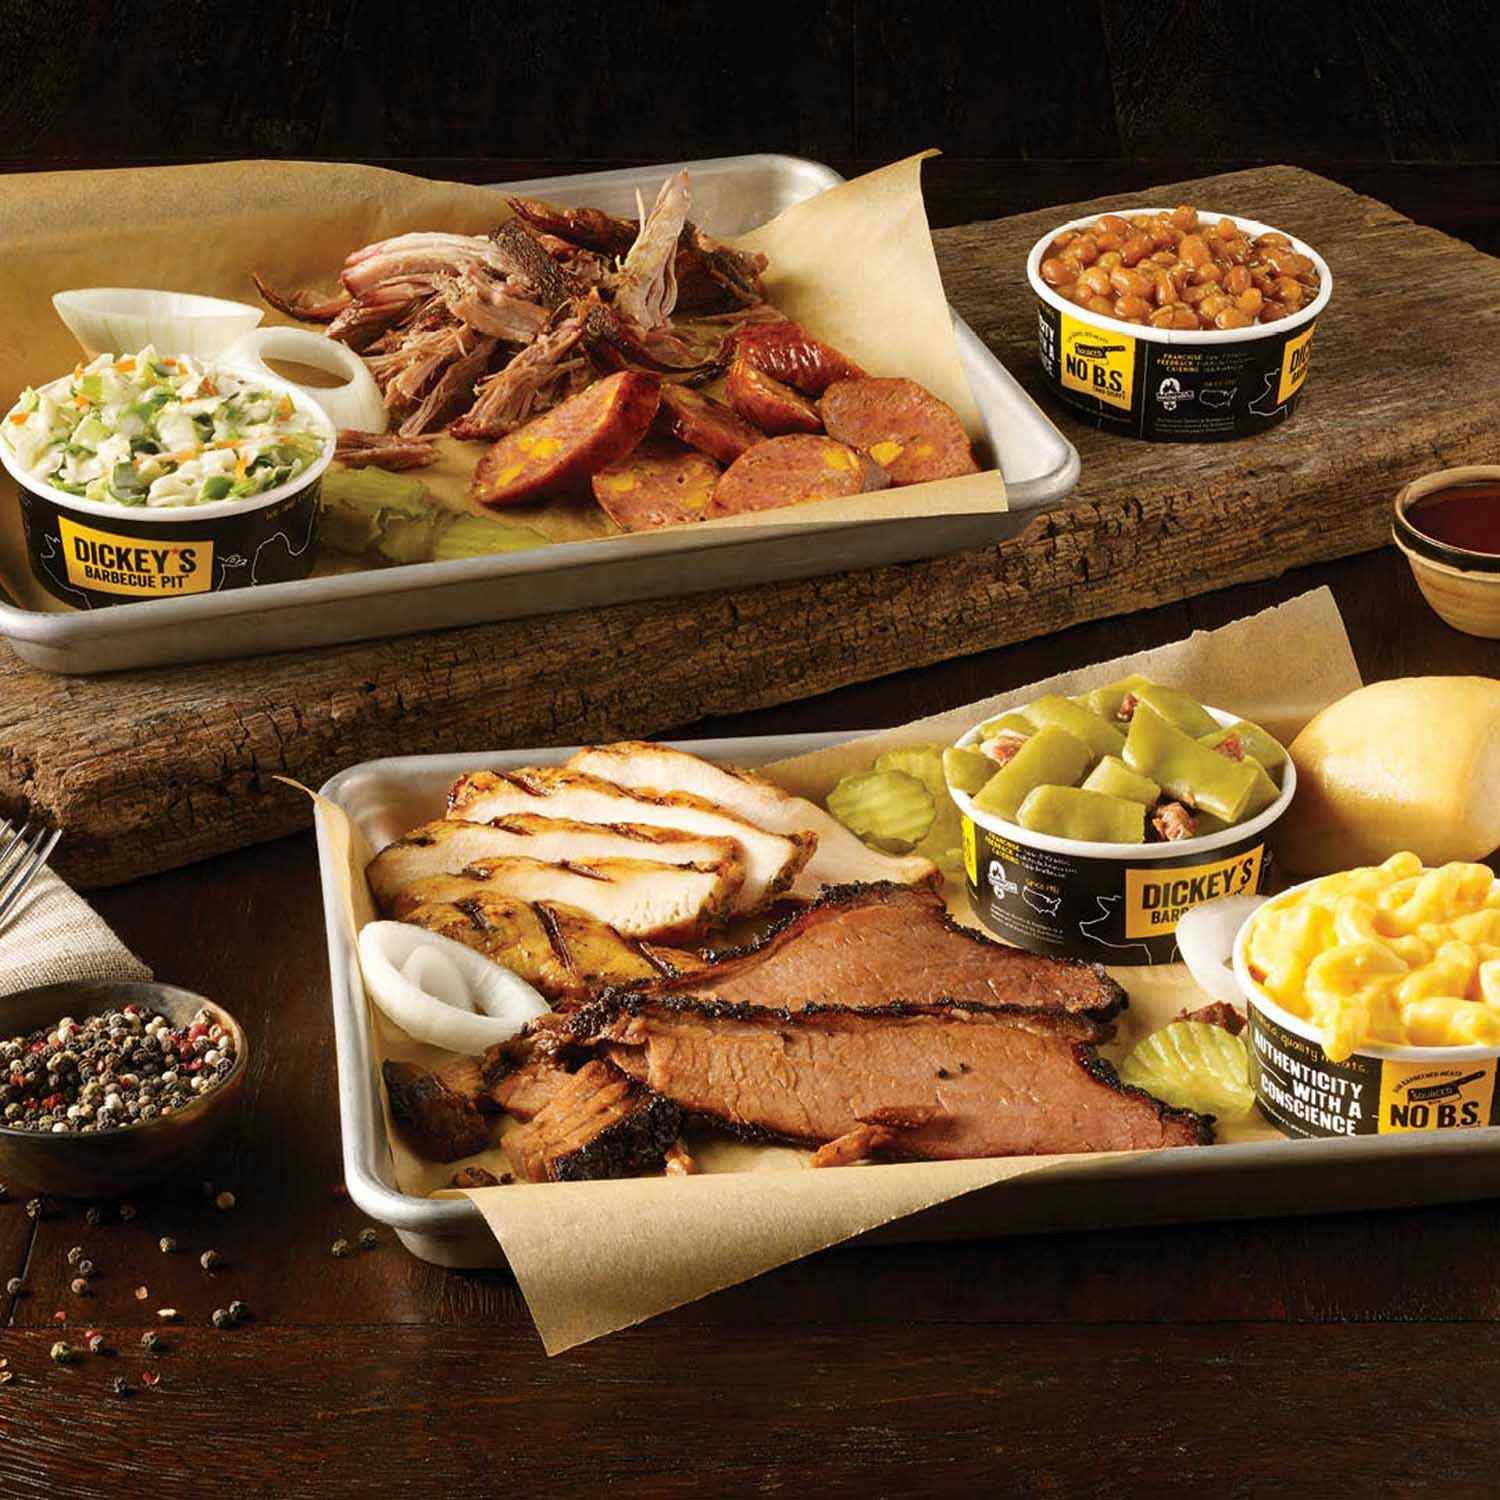 Restaurant Development and Design: Dickey’s Barbecue Pit to Expand N.Y. Footprint